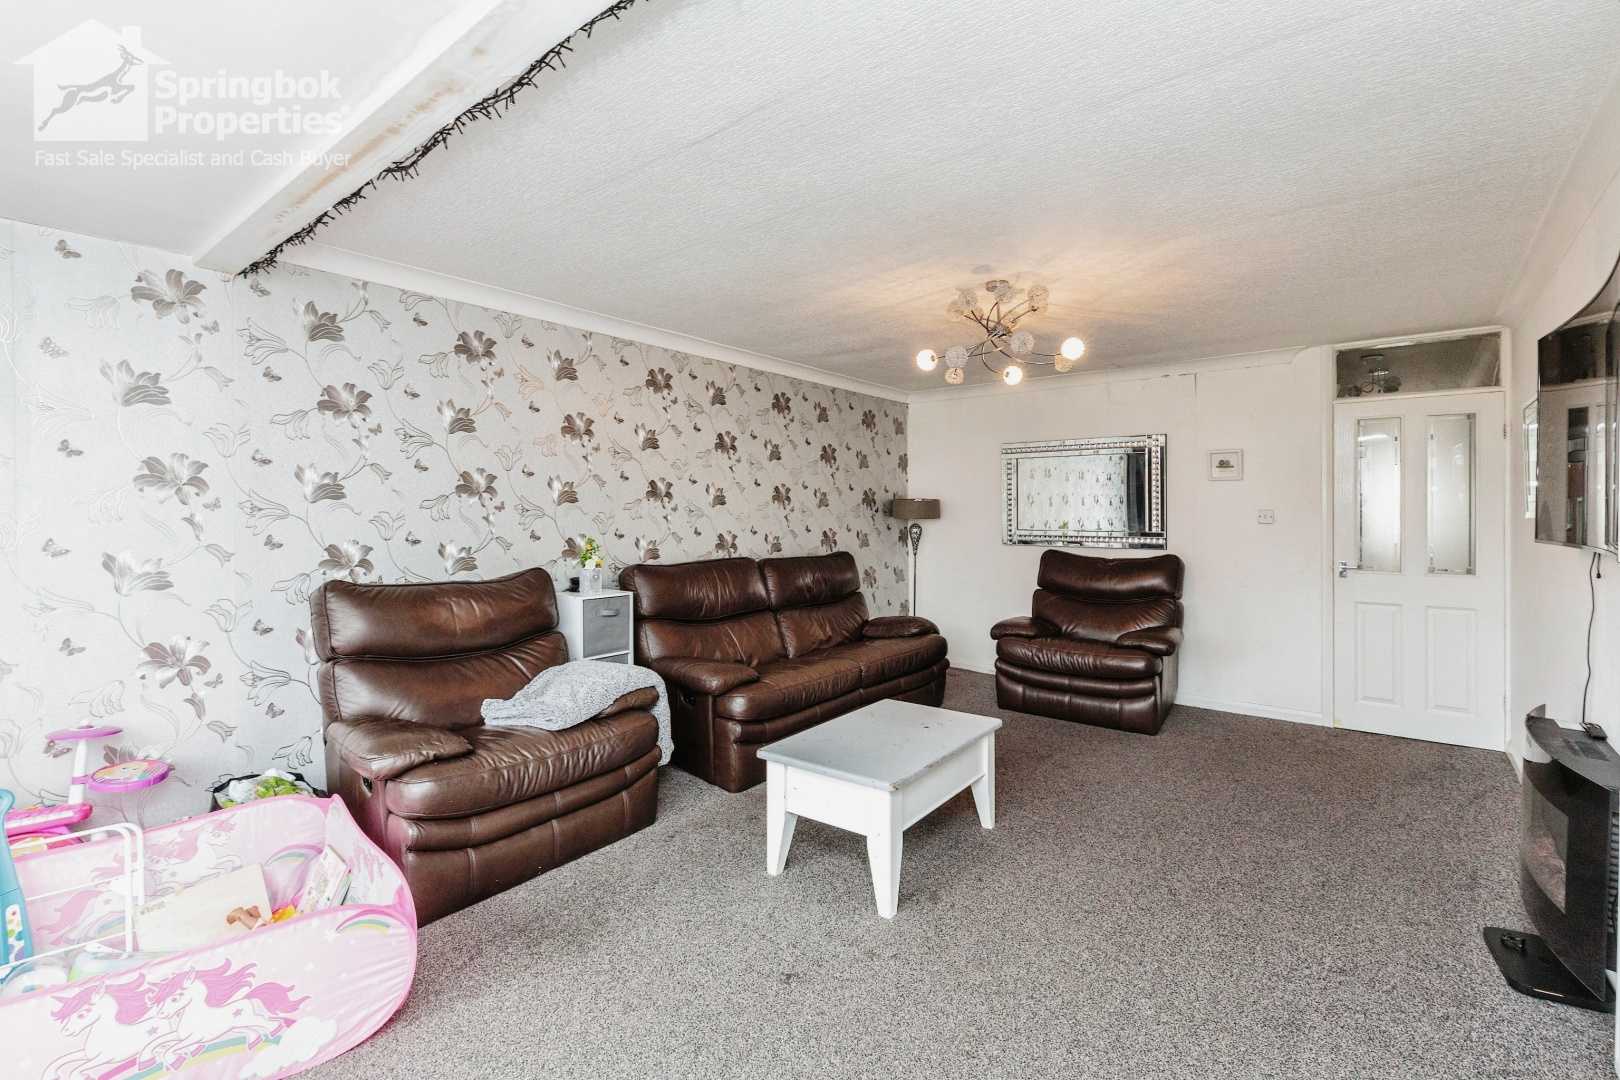 House in Cleveleys, Blackpool 12028680